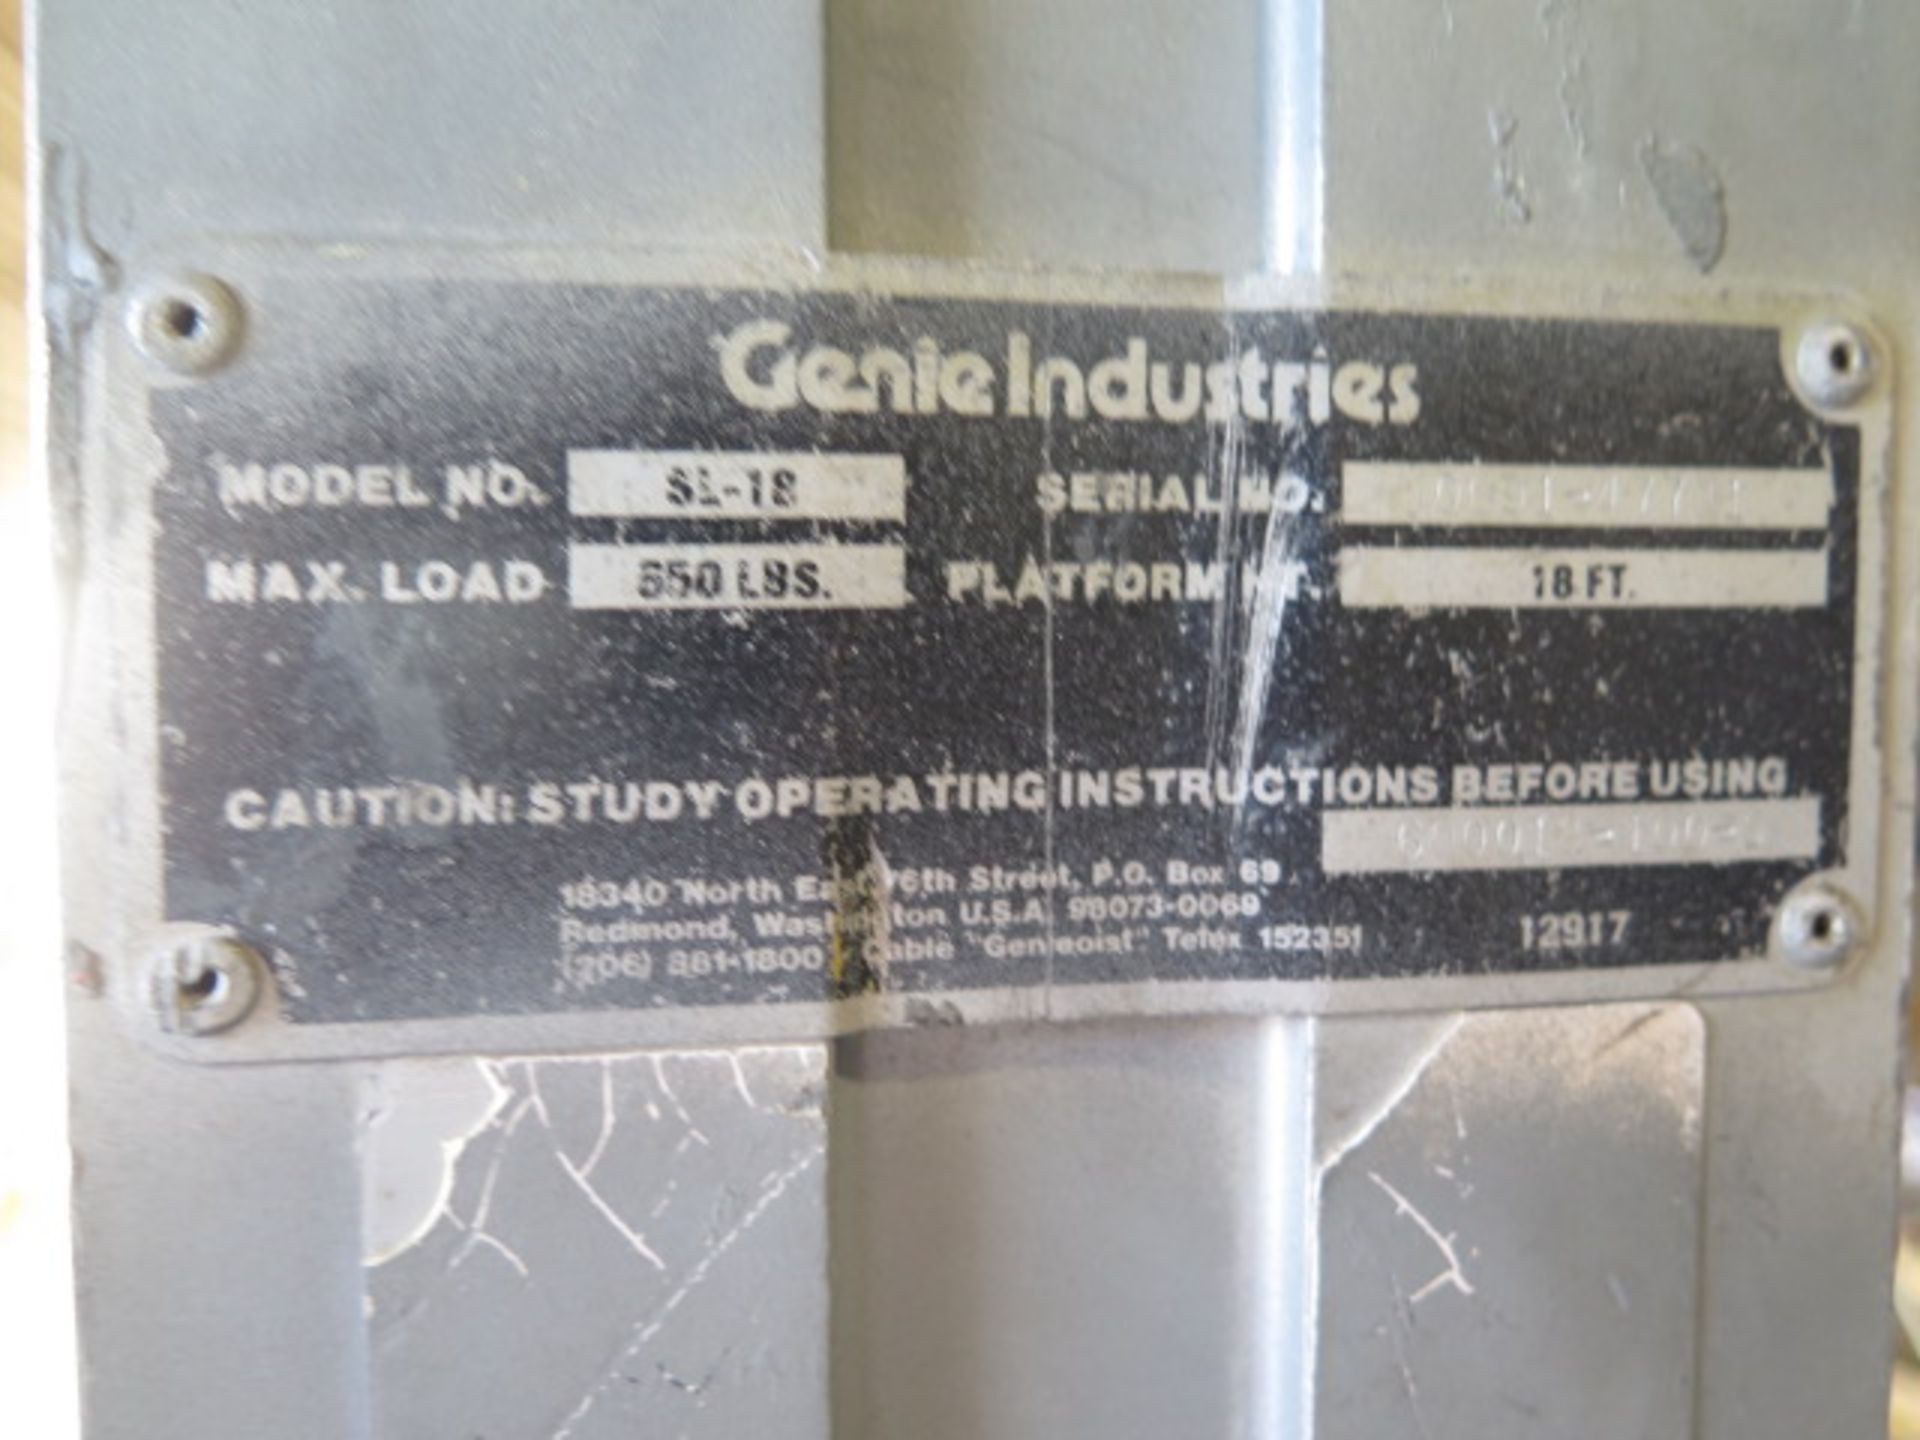 Genie "Super Lift" Material Lift (SOLD AS-IS - NO WARRANTY) - Image 8 of 8